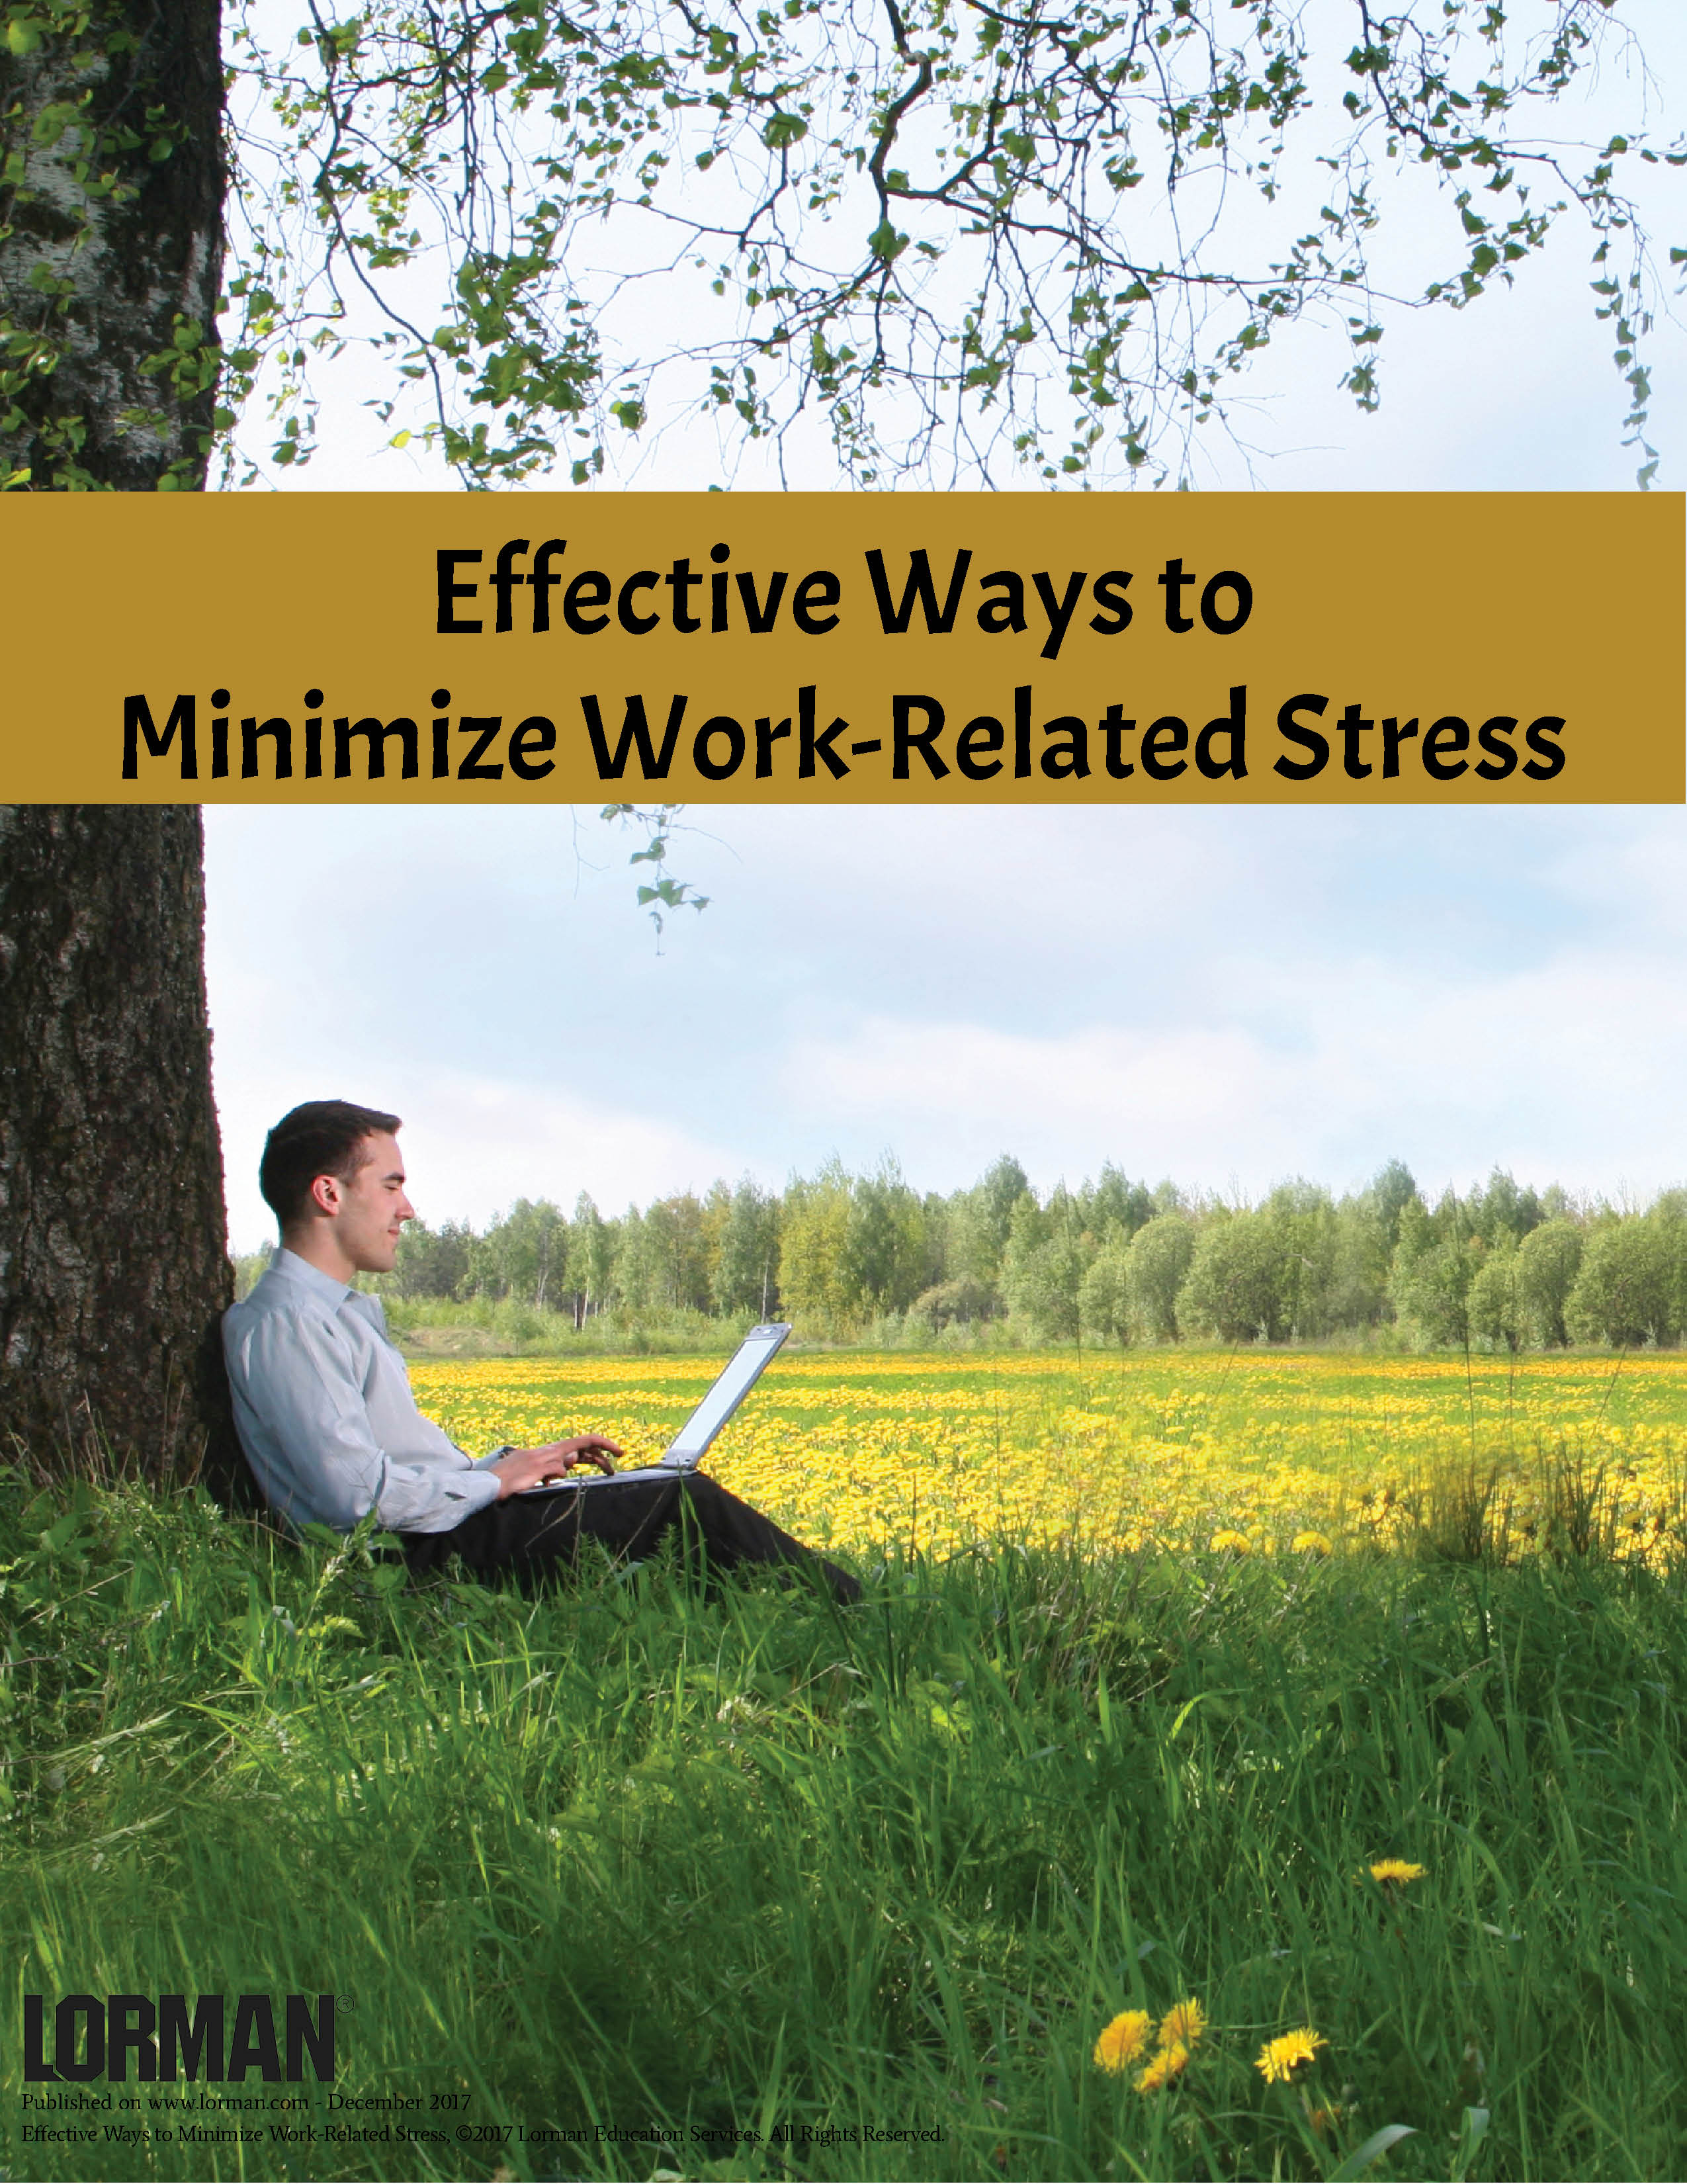 Effective Ways to Minimize Work-Related Stress